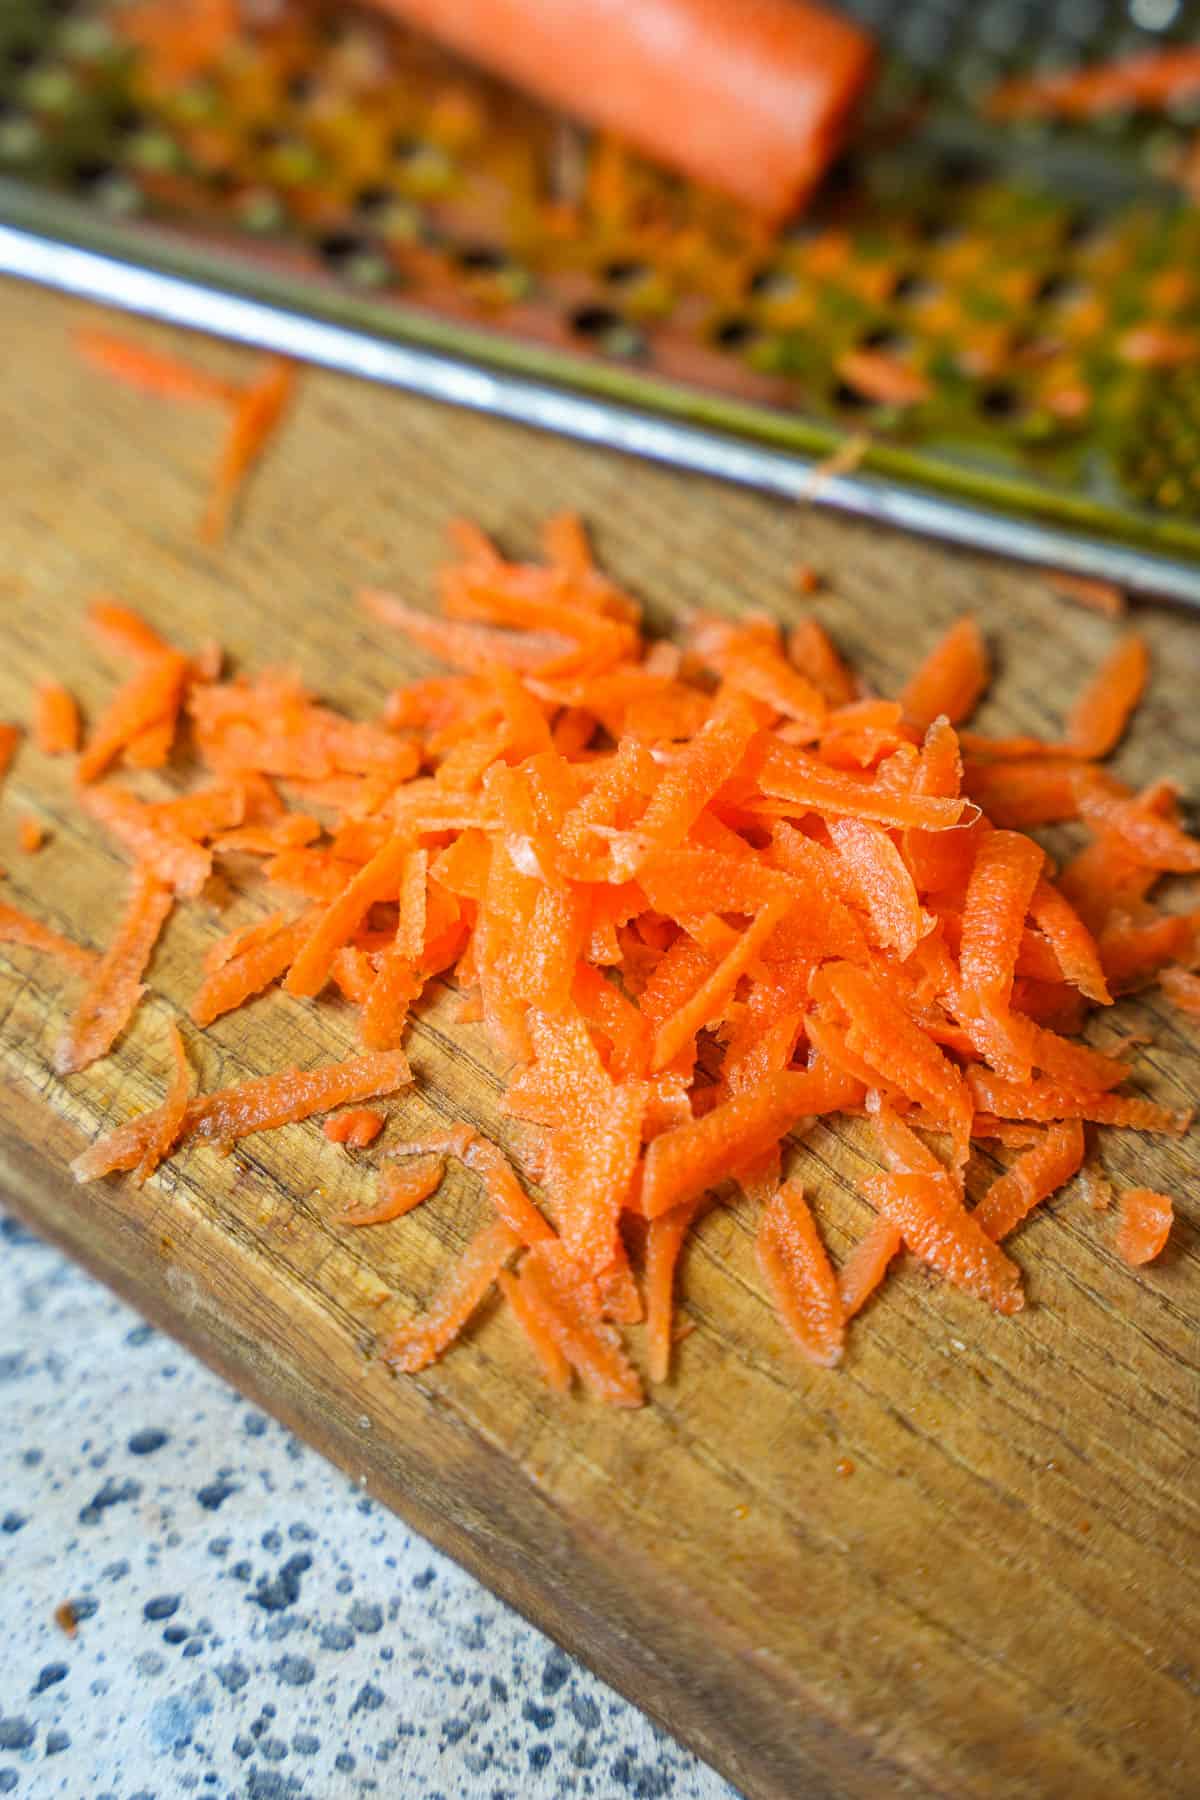 The carrot is shredded on a wooden board next to a grater.